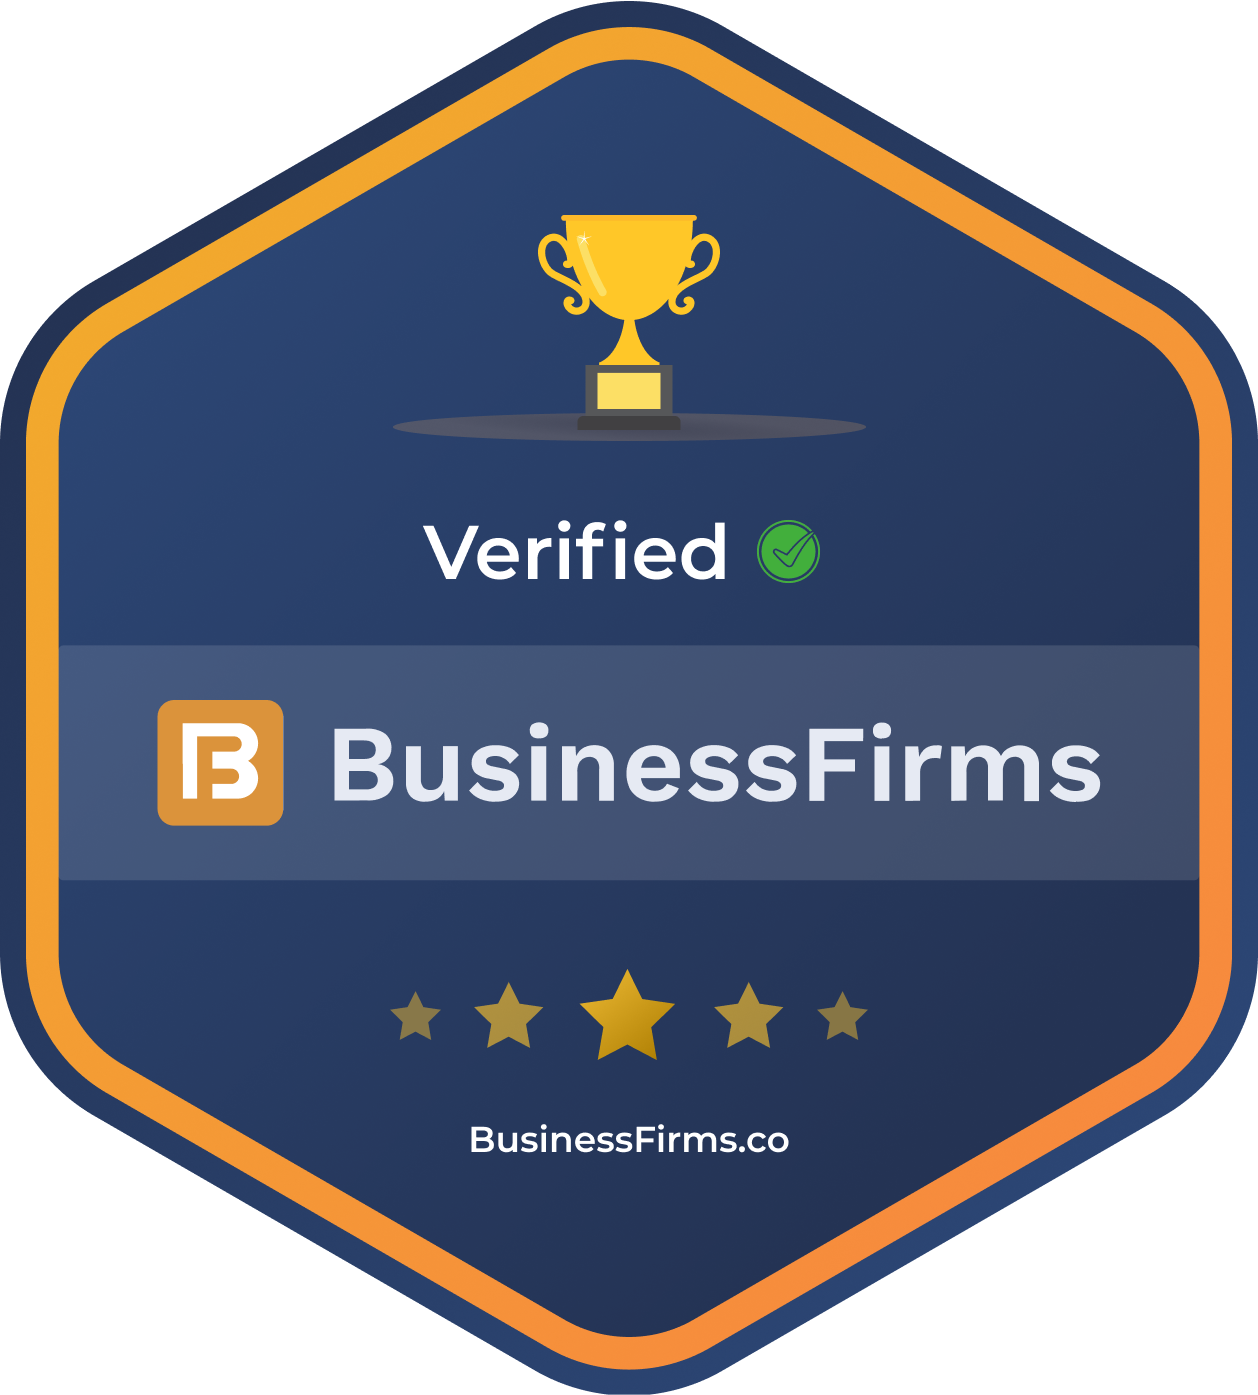 Verified business firm image. Verified business firm in Dubai. 